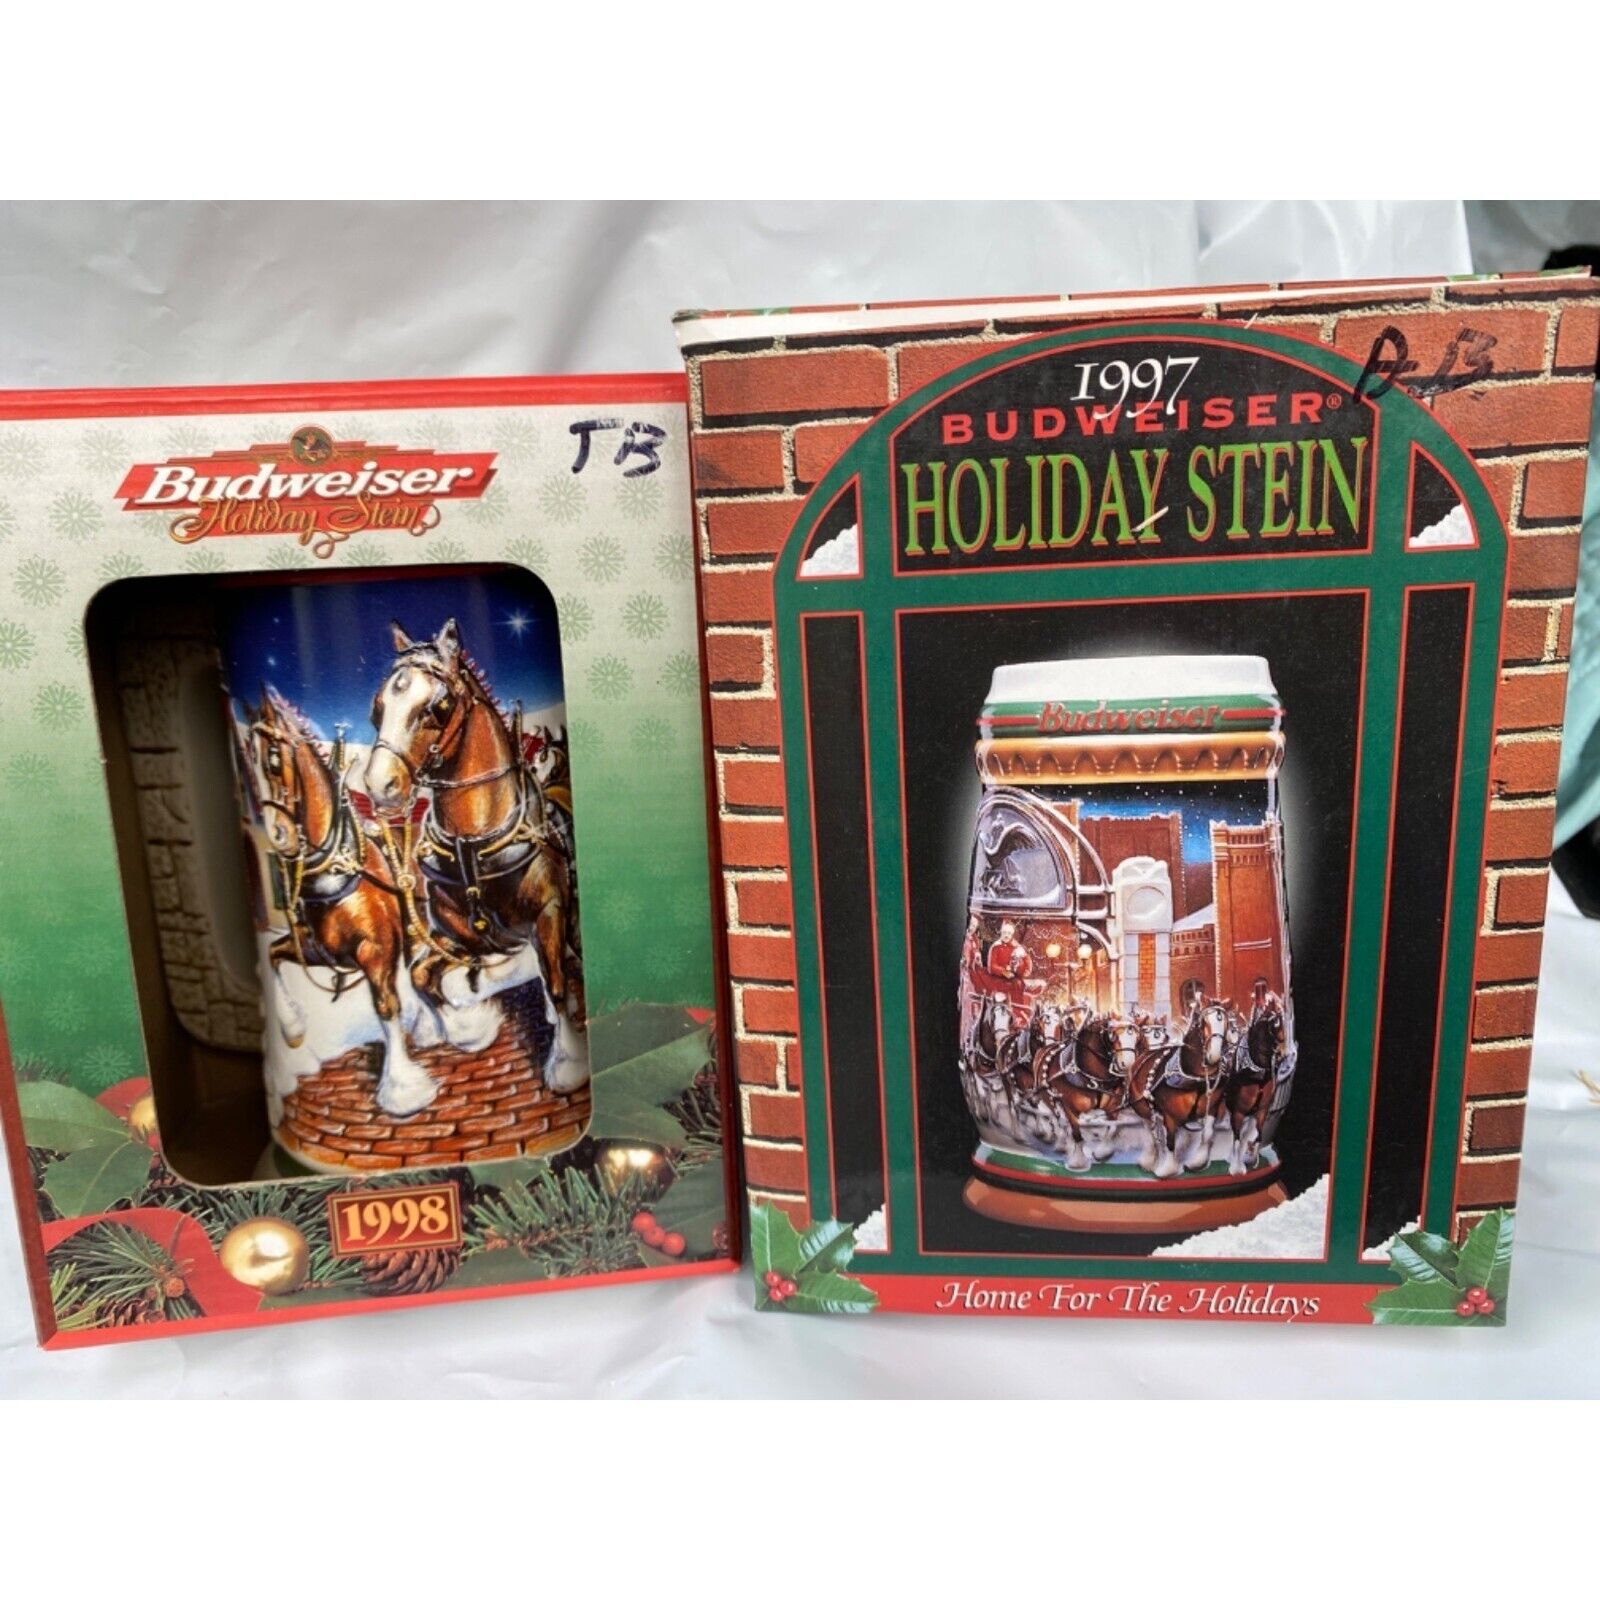 Budweiser Holiday Stein Series 1997 1998 Grant\'s Clydesdales Christmas